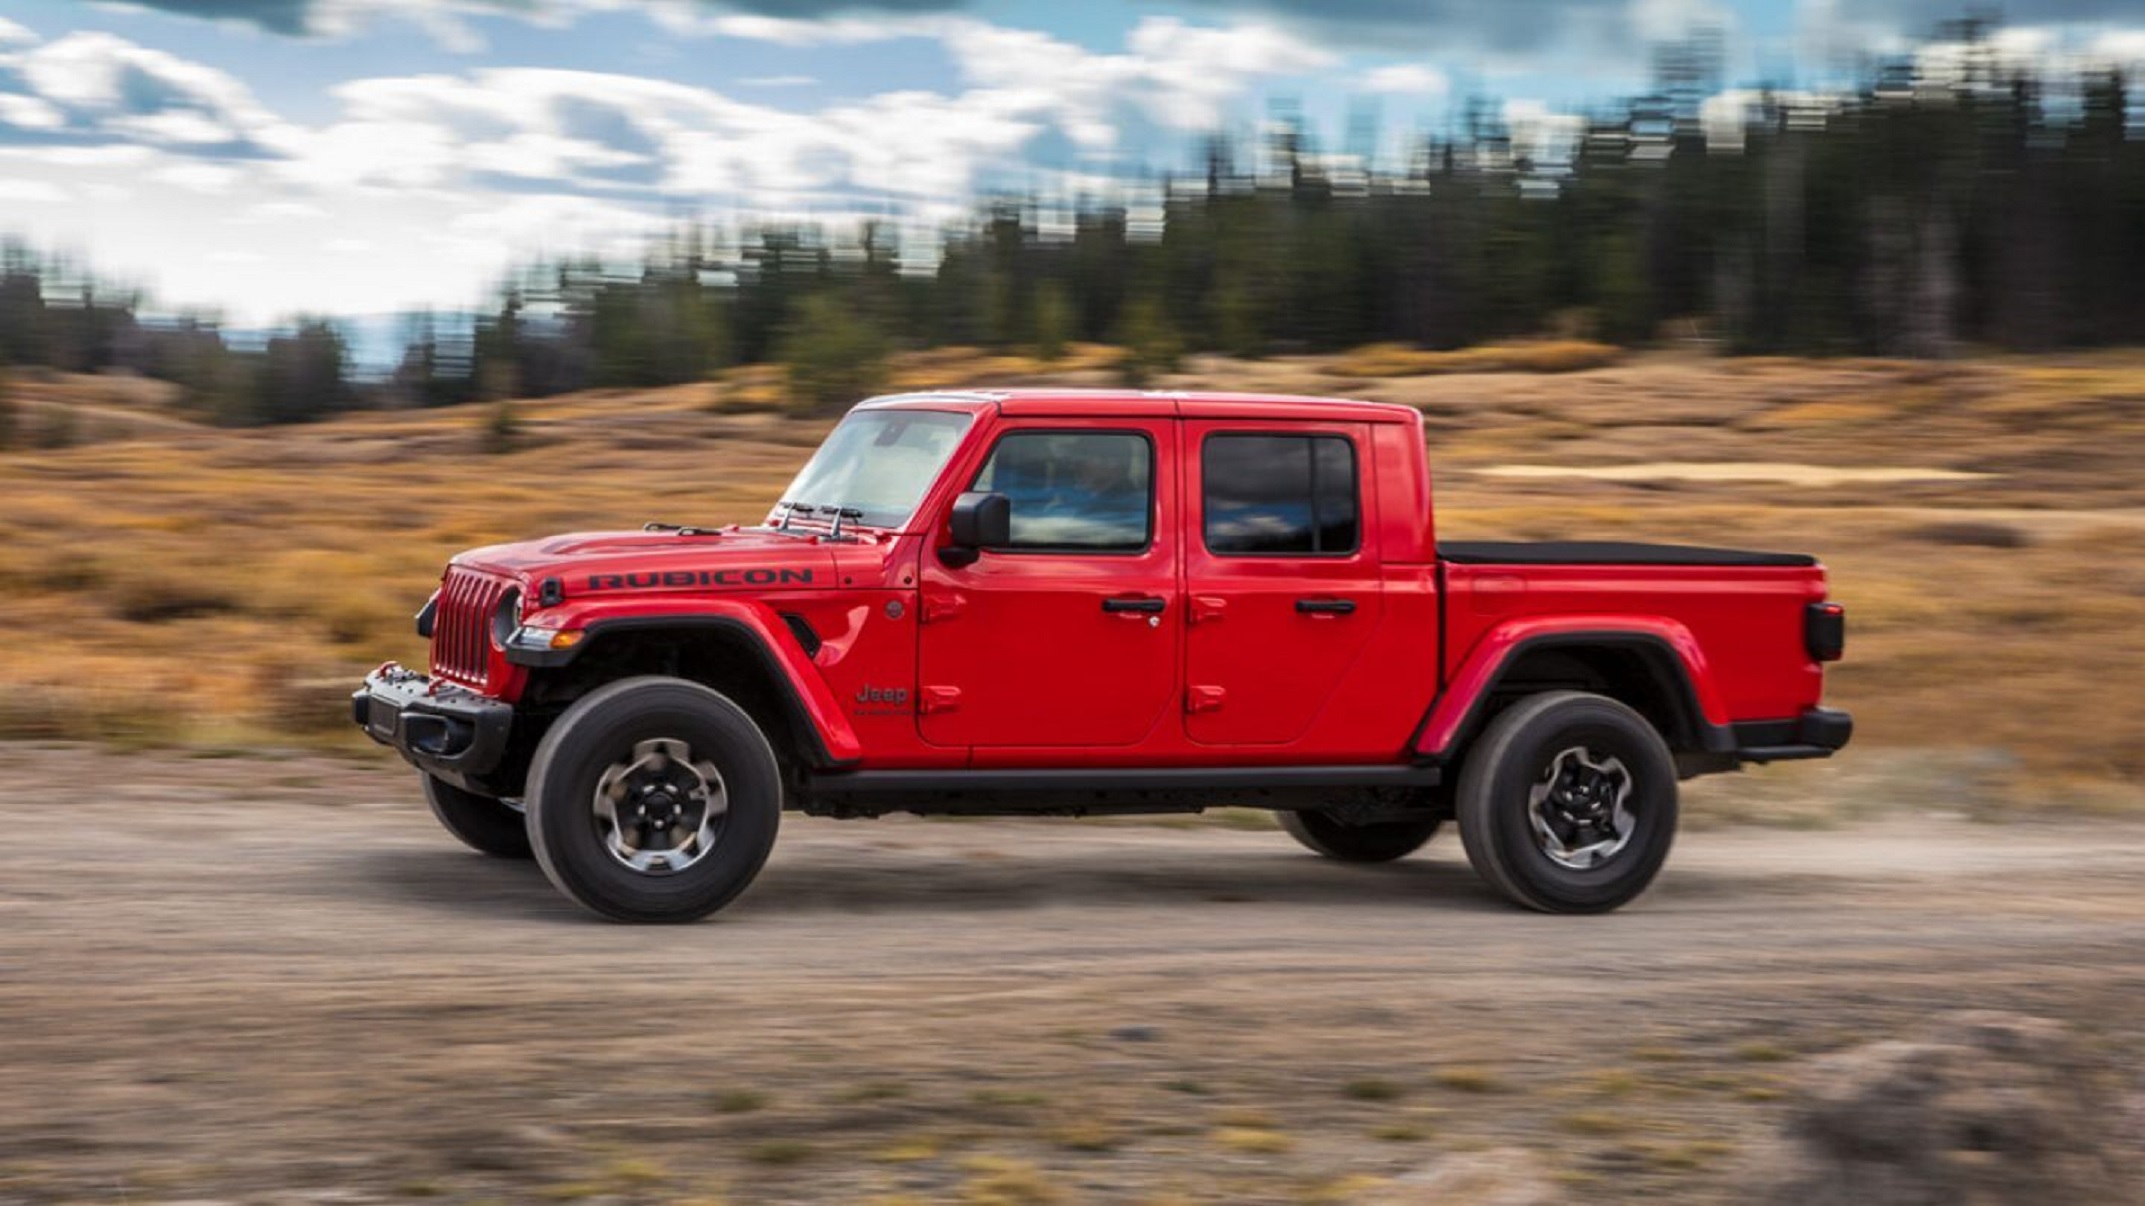 The Next Jeep Gladiator Model Is a No Brainer